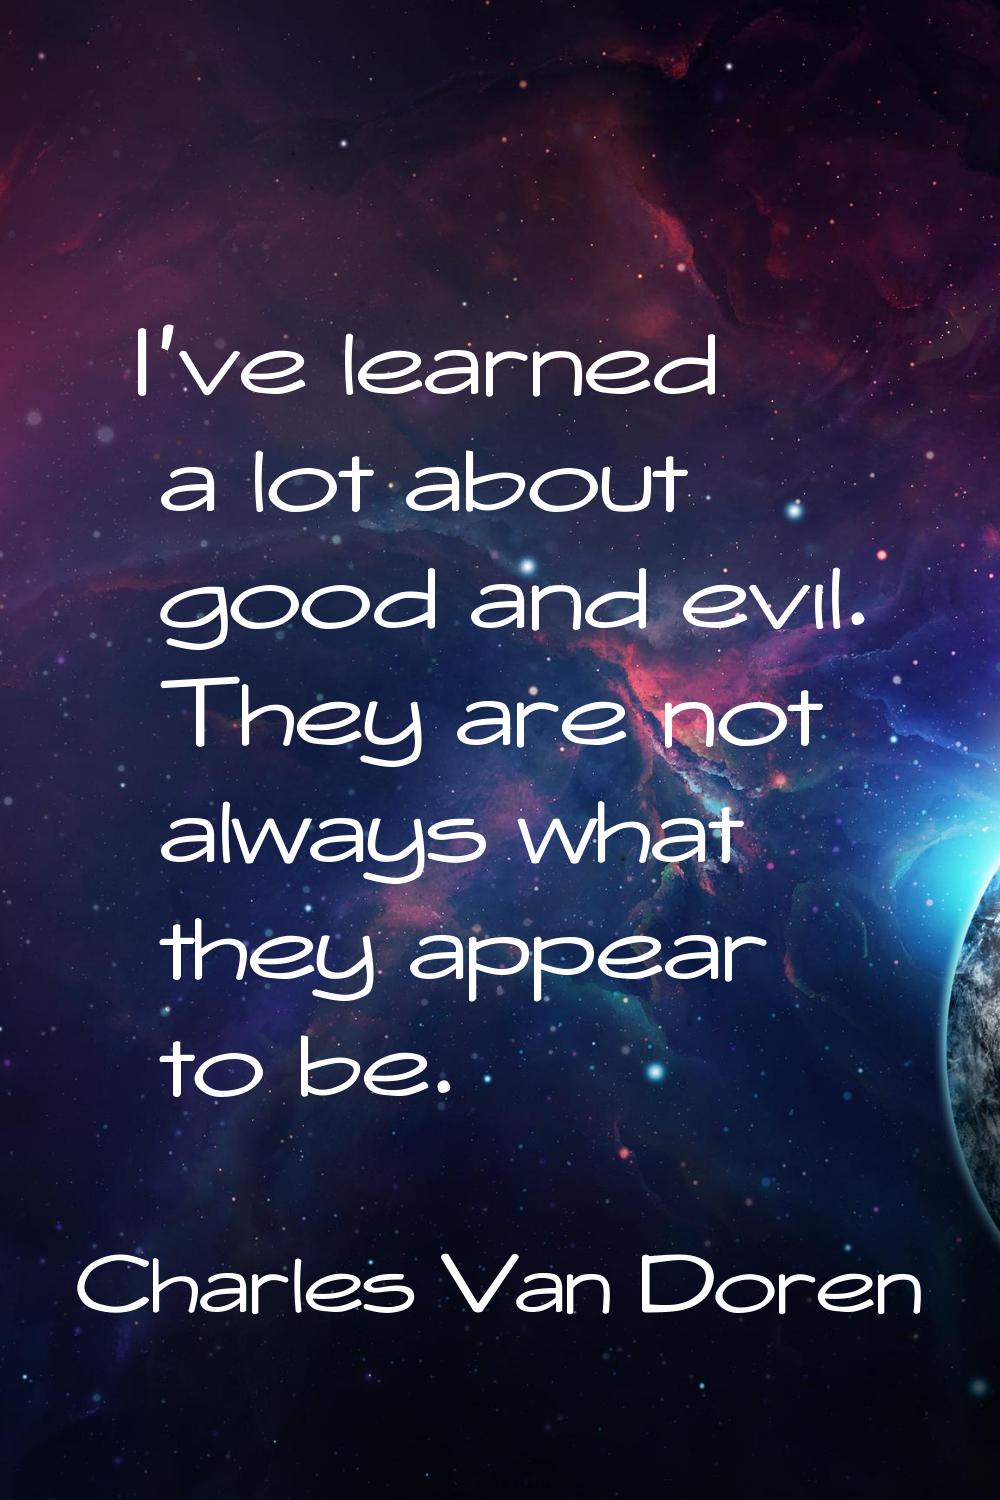 I've learned a lot about good and evil. They are not always what they appear to be.